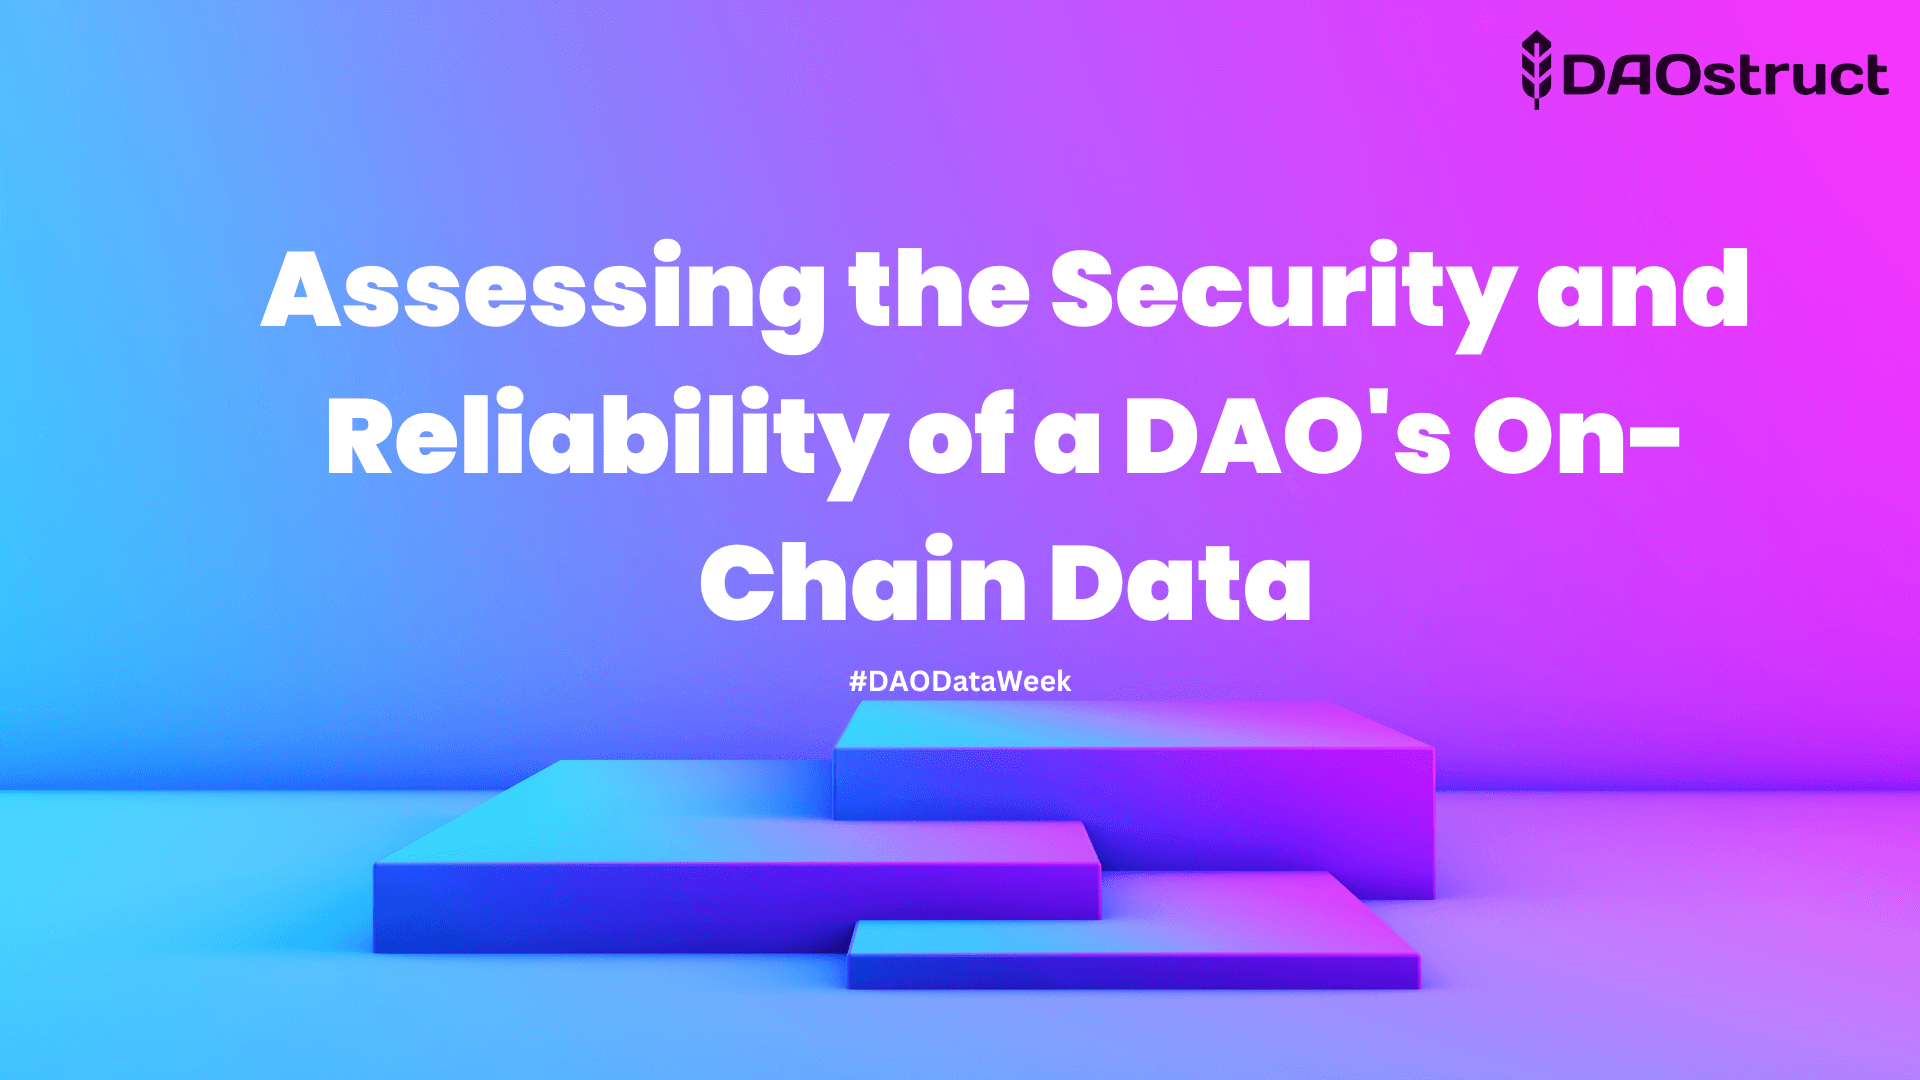 Assessing the Security and Reliability of a DAO's On-Chain Data